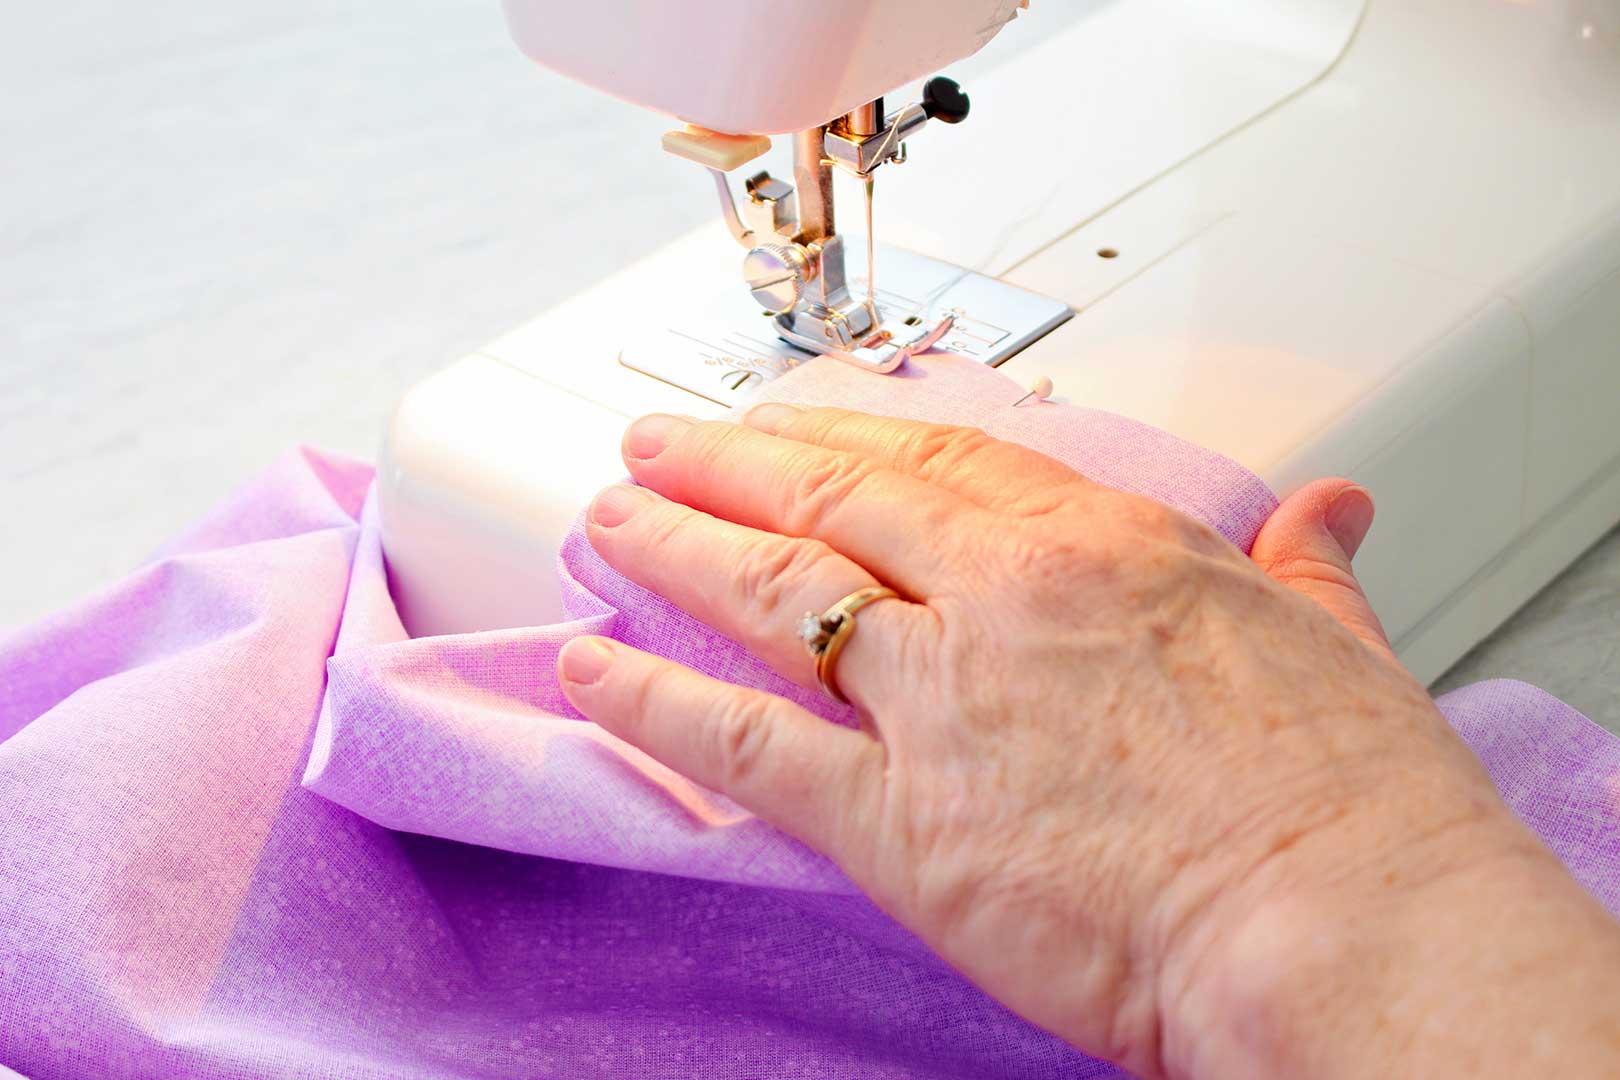 Hand sewing purple fabric for the pillowcase on a sewing machine.